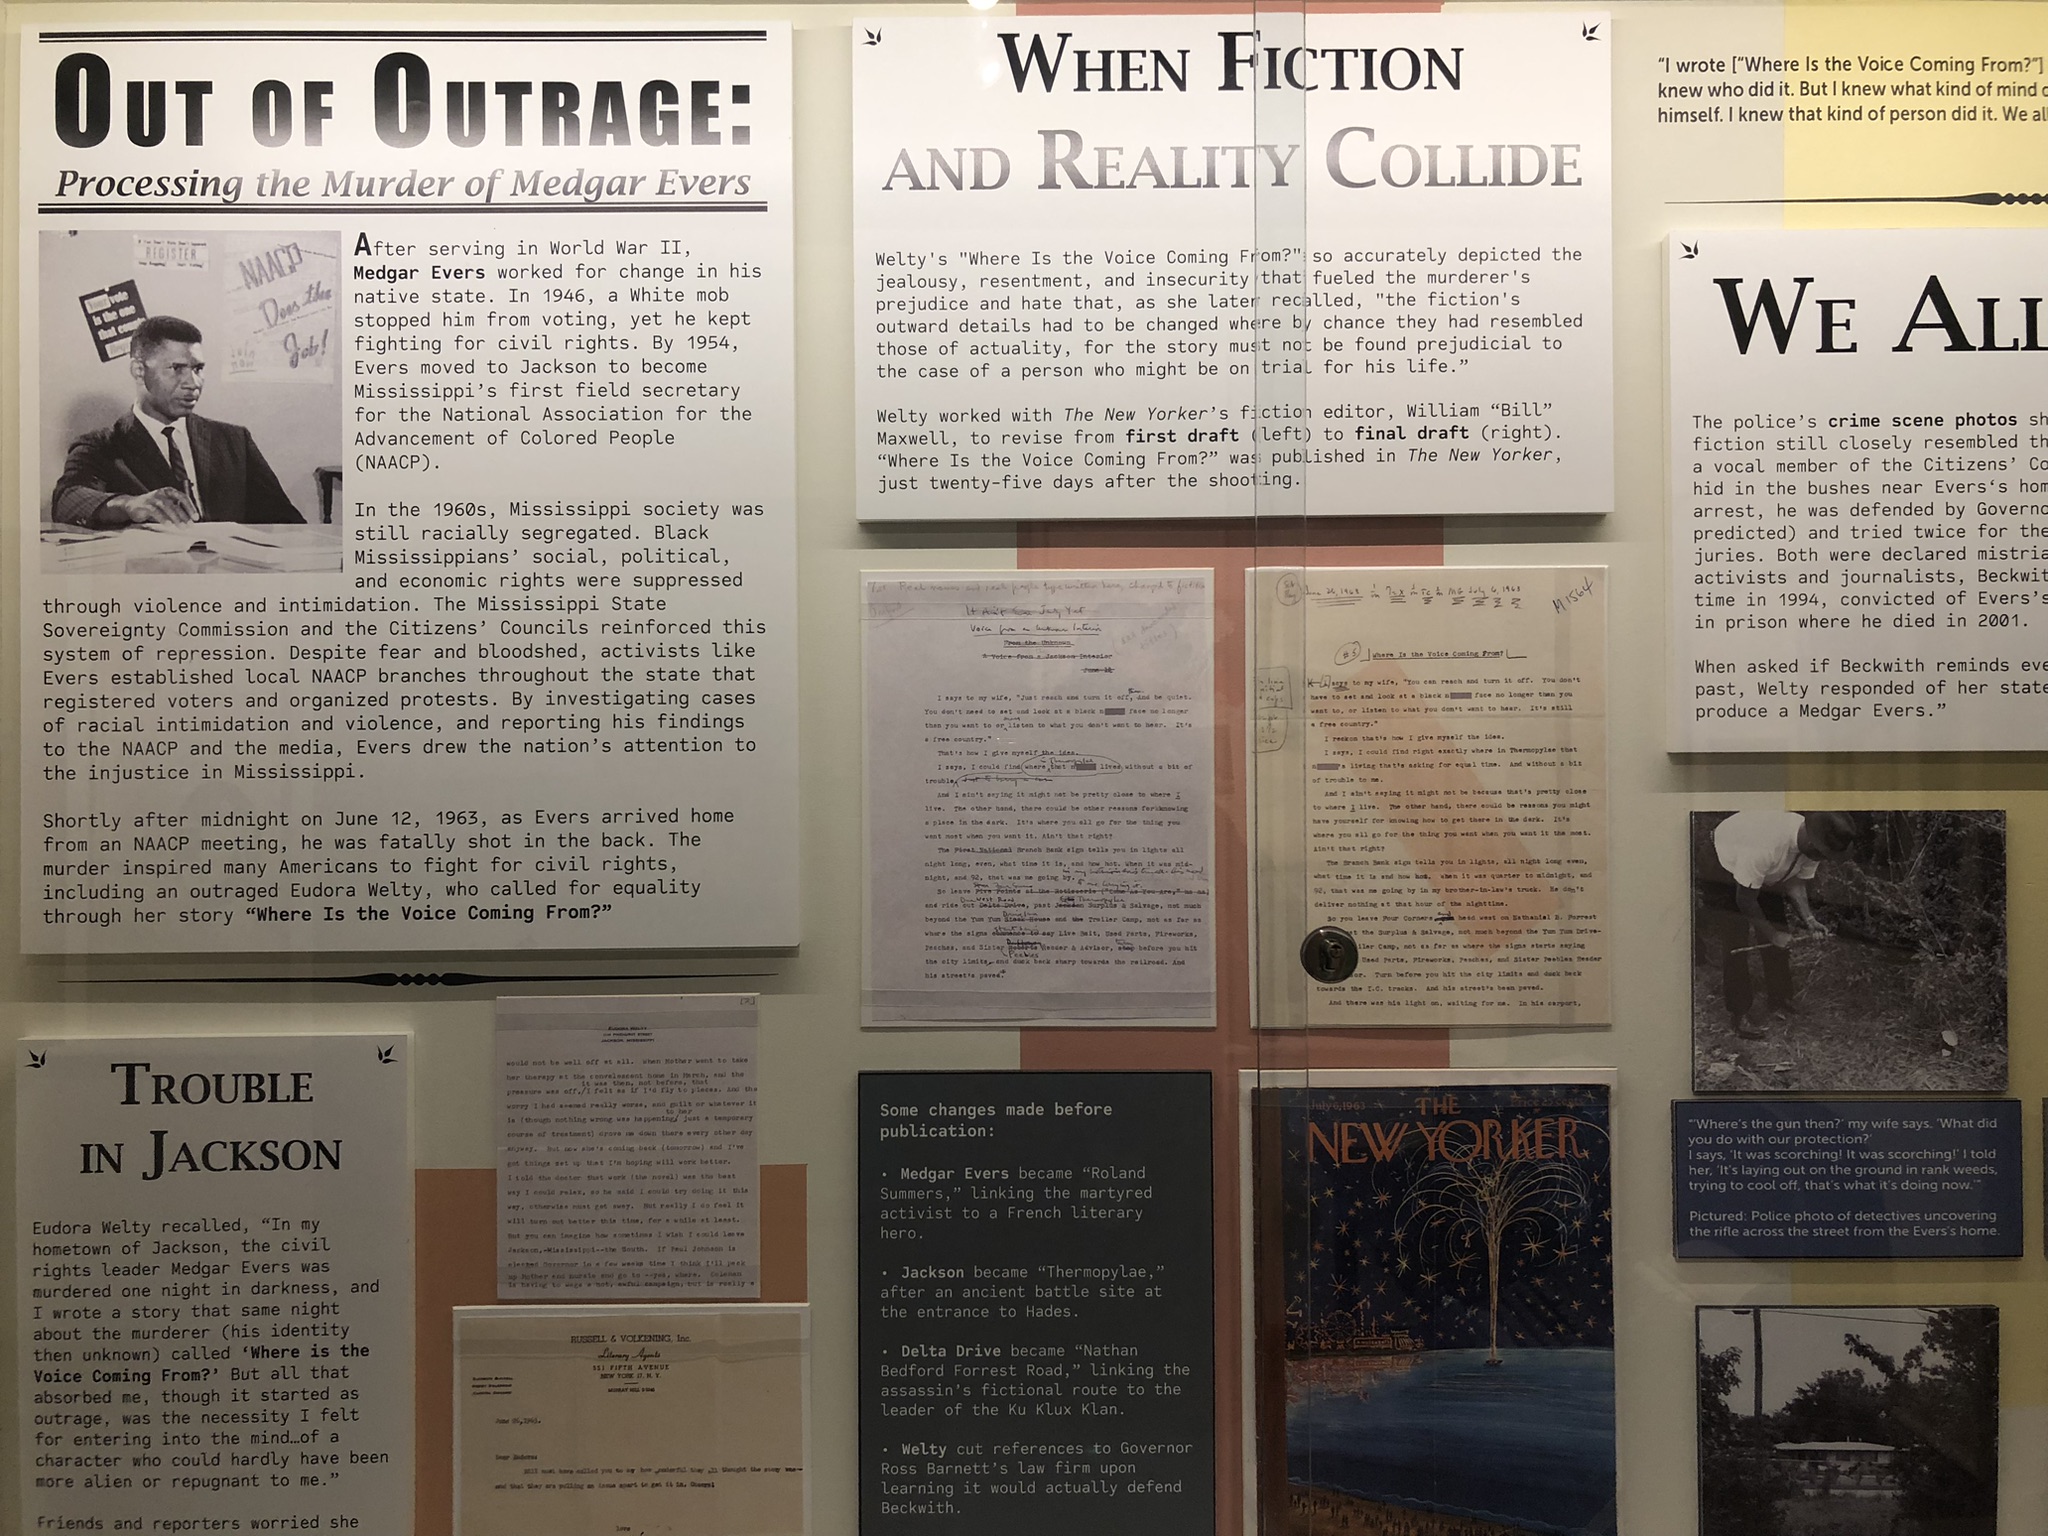 The Eudora Welty Foundation » Activities Abound in the Welty